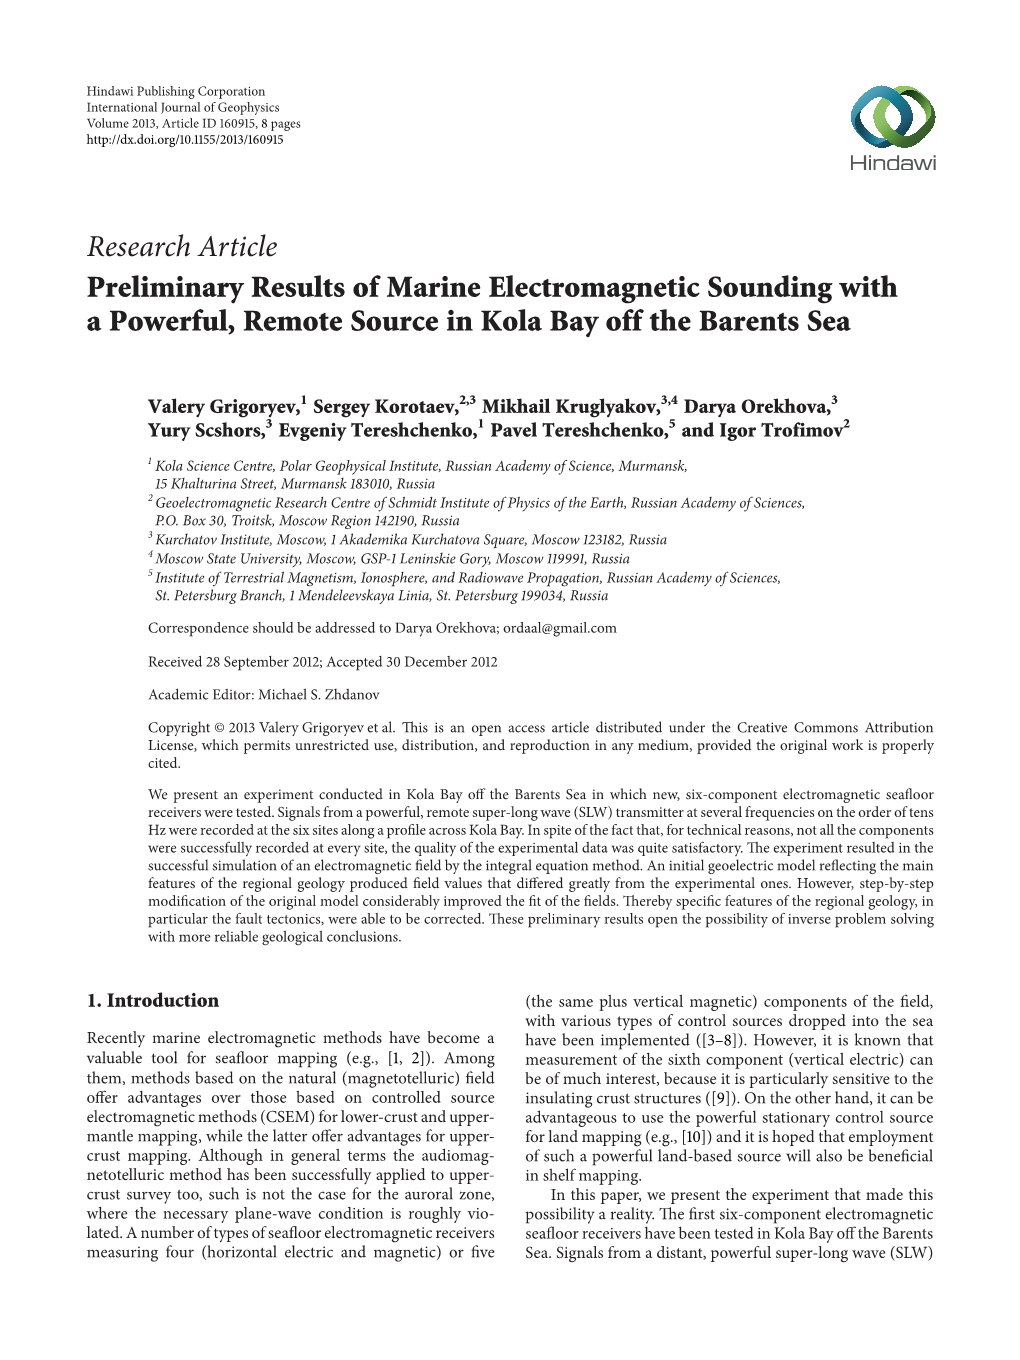 Preliminary Results of Marine Electromagnetic Sounding with a Powerful, Remote Source in Kola Bay Off the Barents Sea